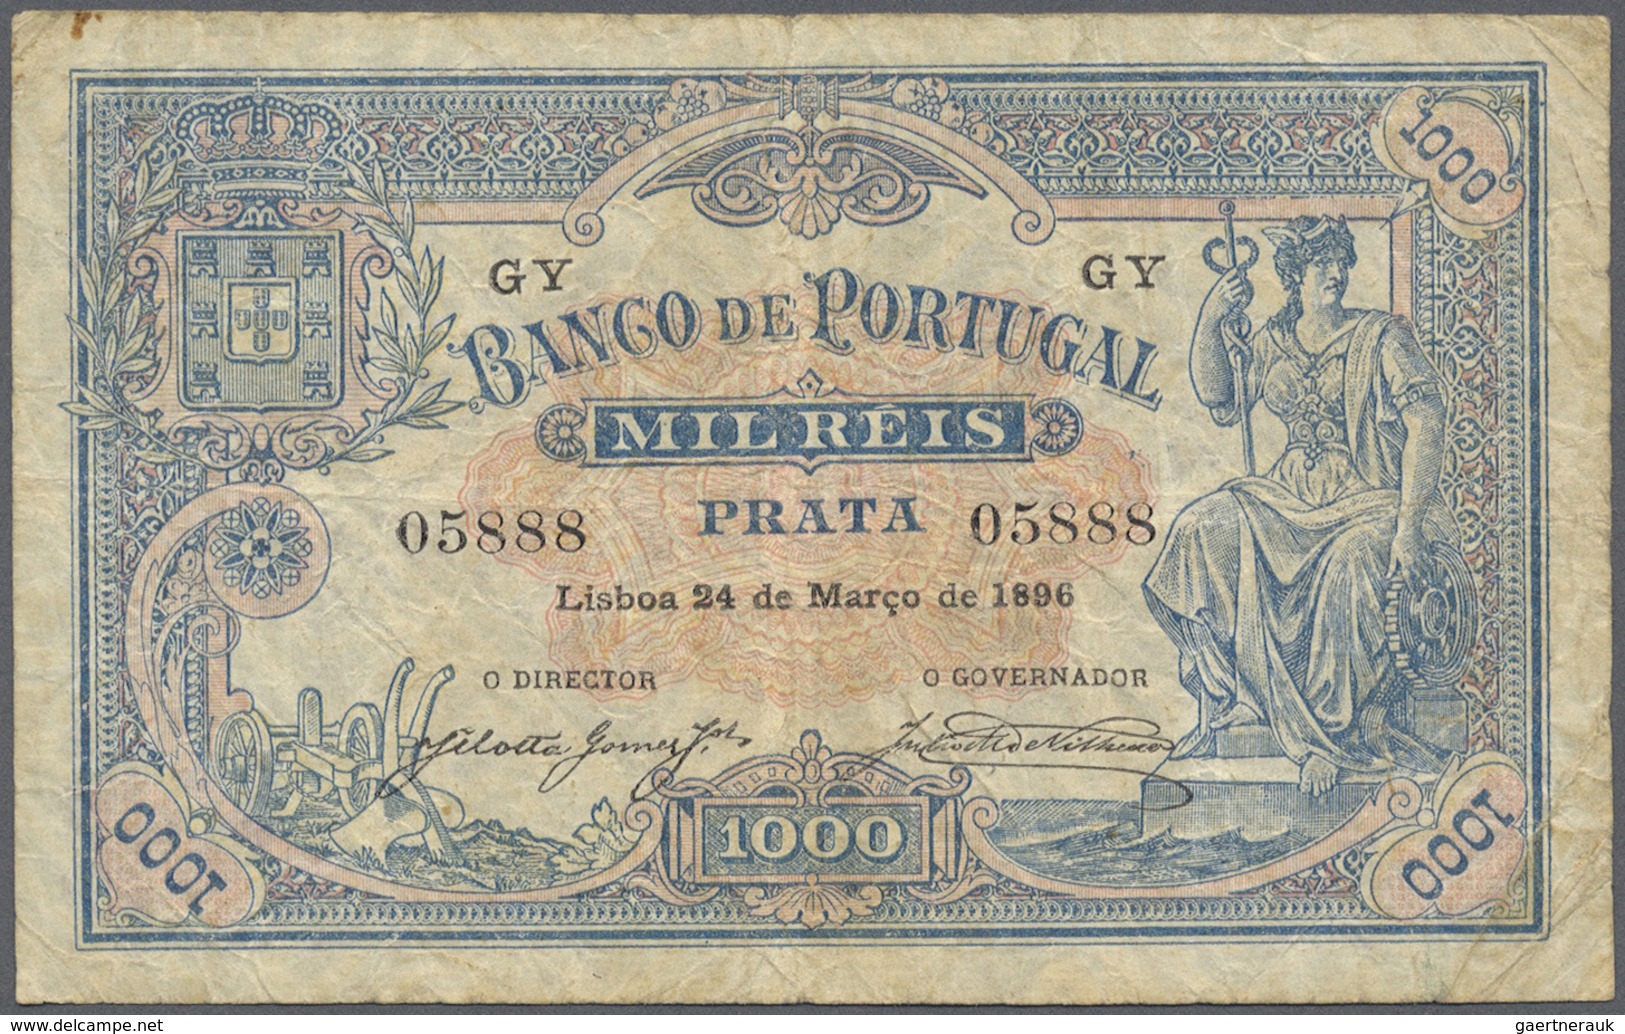 Portugal: 1000 Reis 1896 P. 73, Folds, Creases In Paper, No Holes Or Tears, Original Colors, Conditi - Portugal